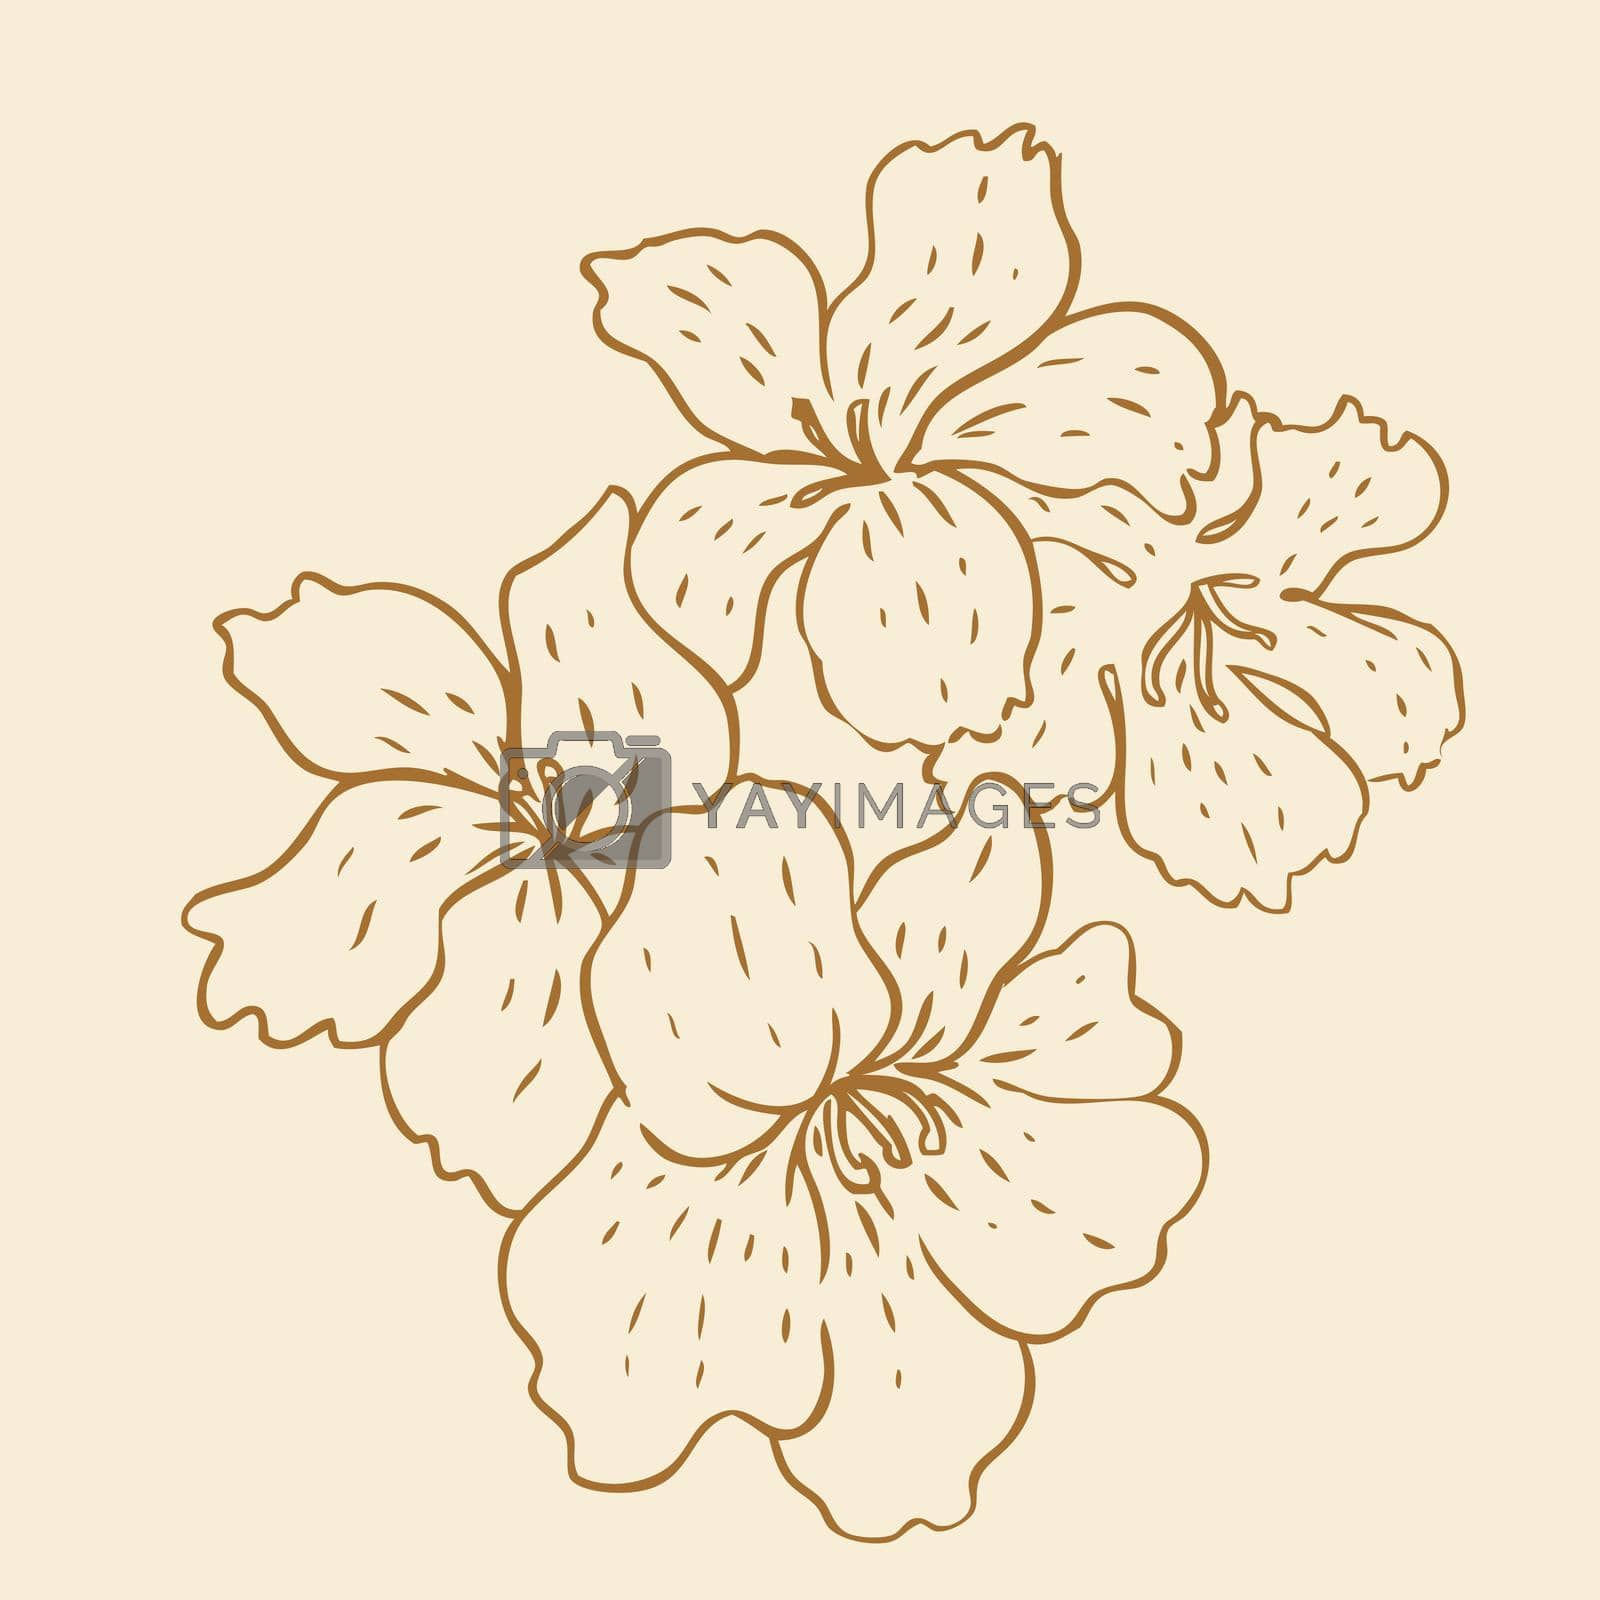 Royalty free image of Vintage hand-drawing background with flowers by varka